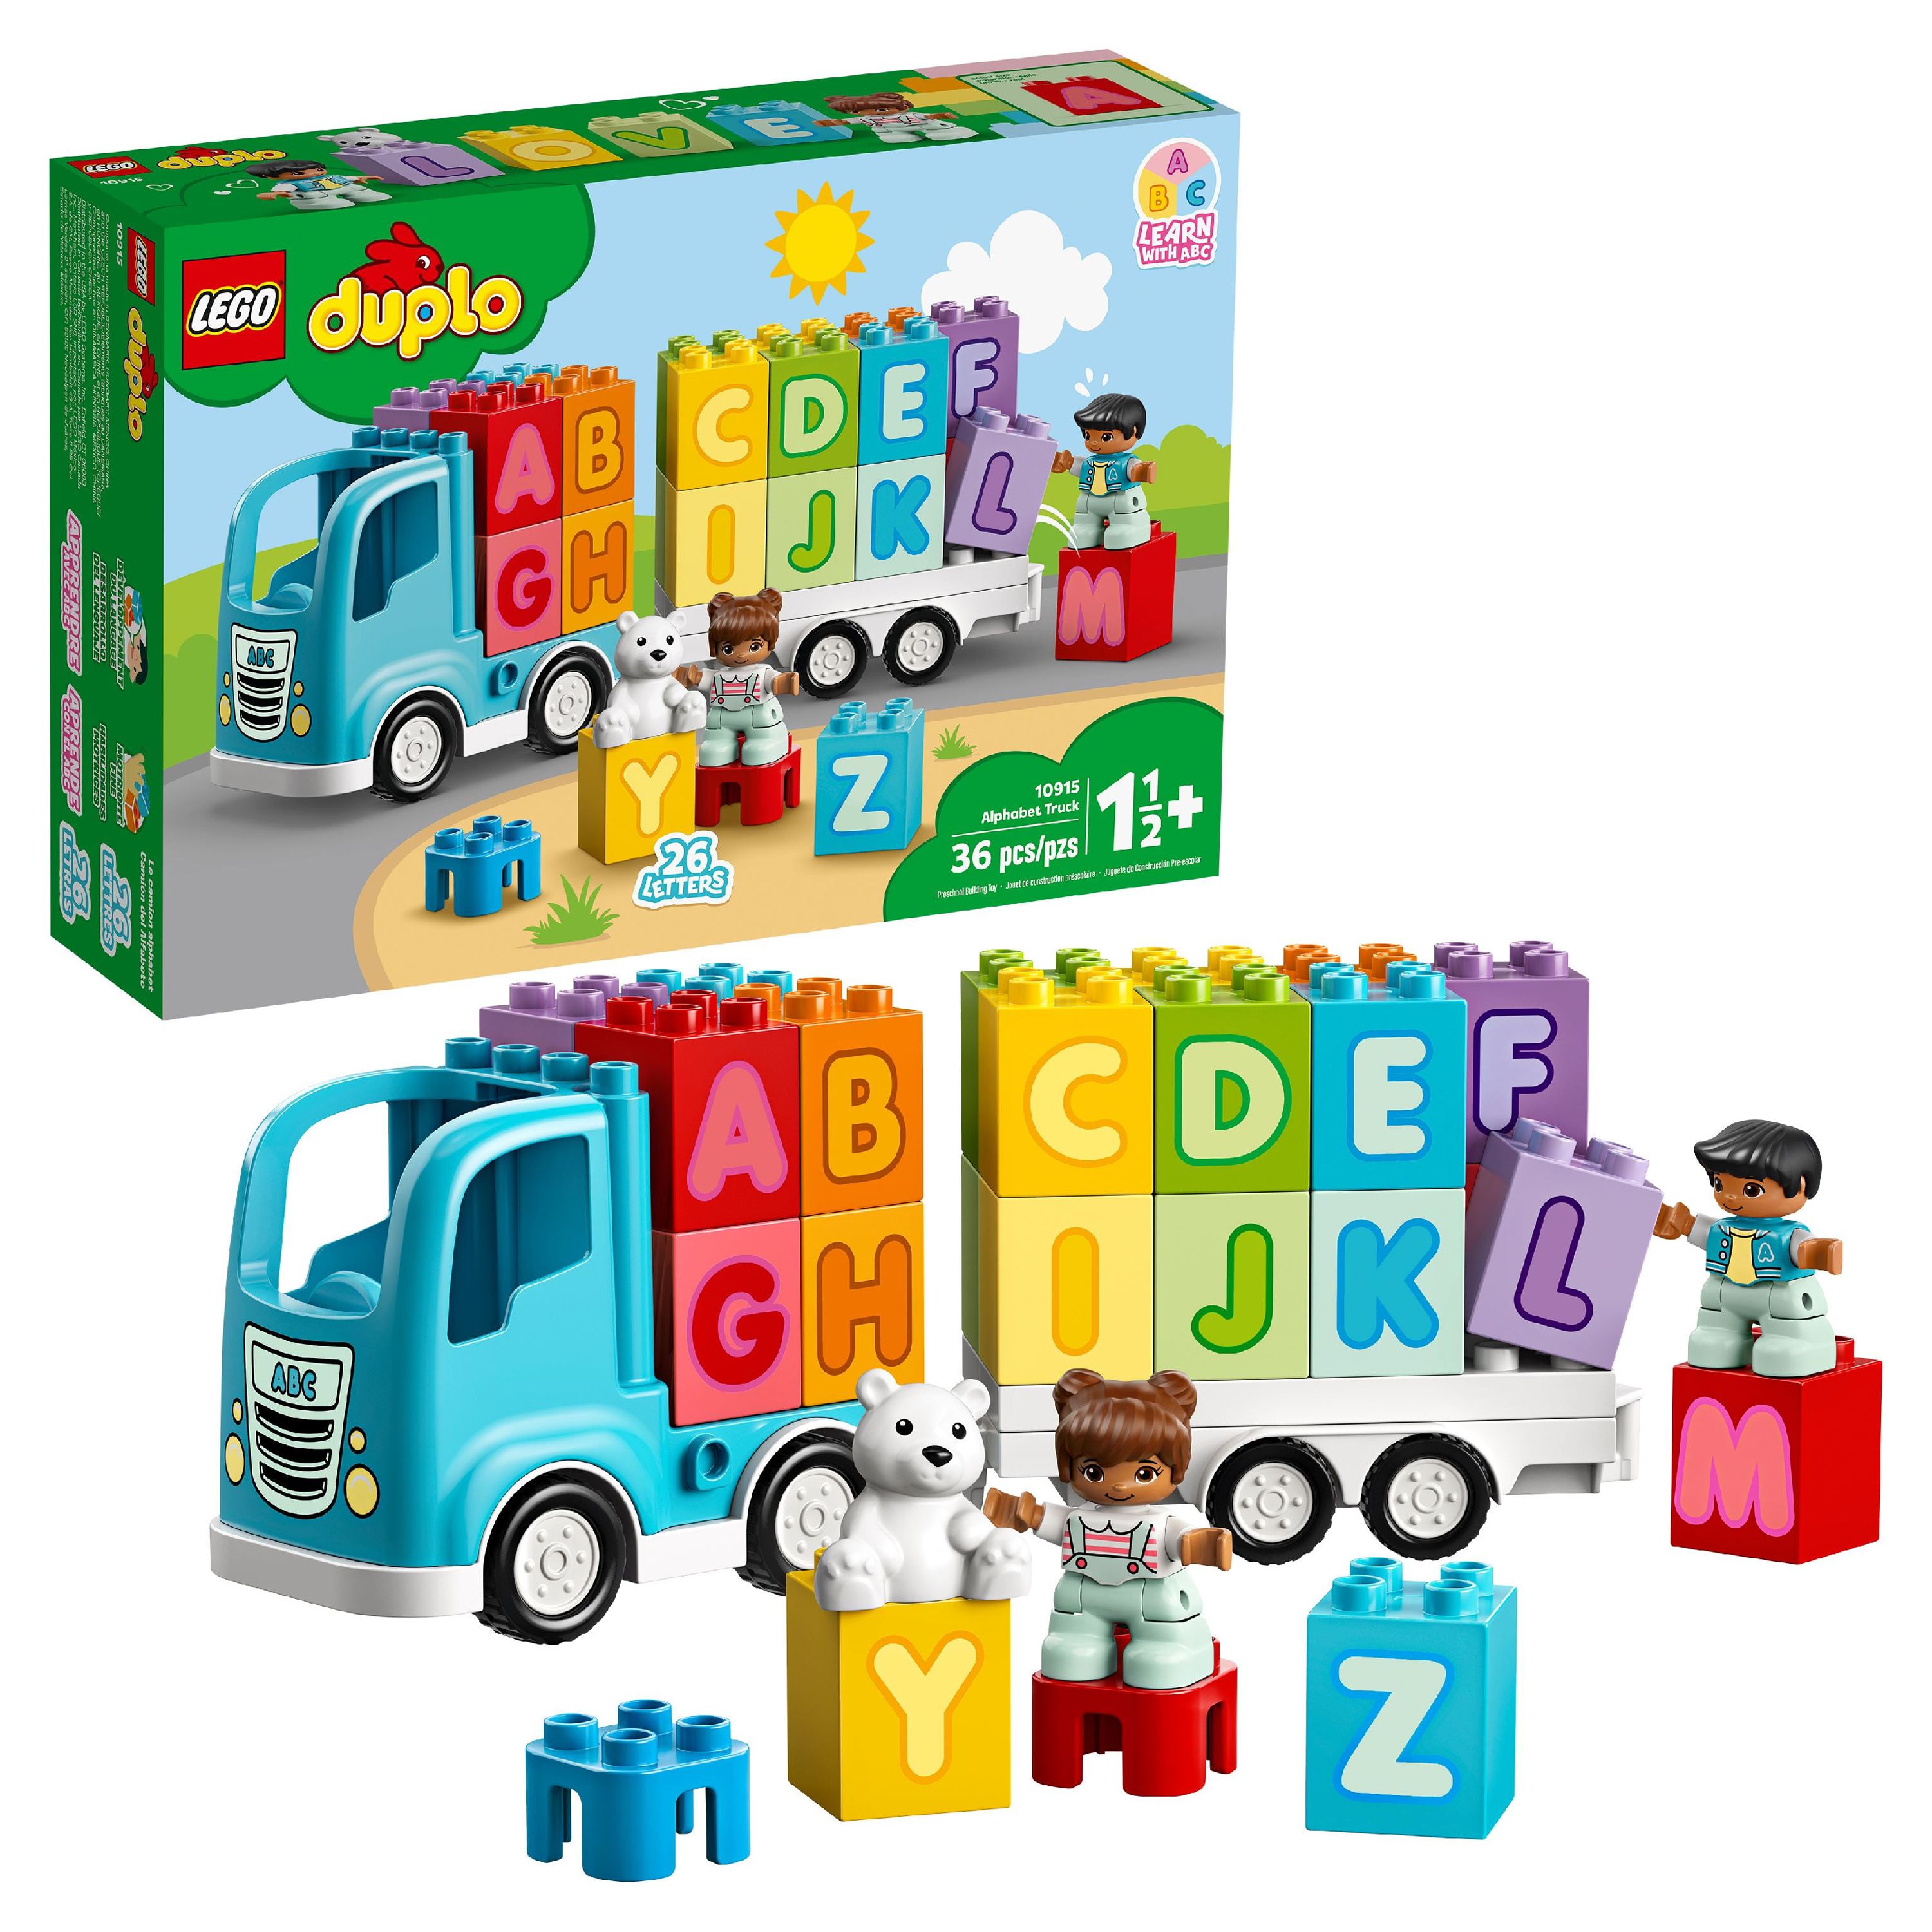 LEGO DUPLO My First Alphabet Truck 10915 Educational Building Toy for Toddlers (36 Pieces) - image 1 of 12